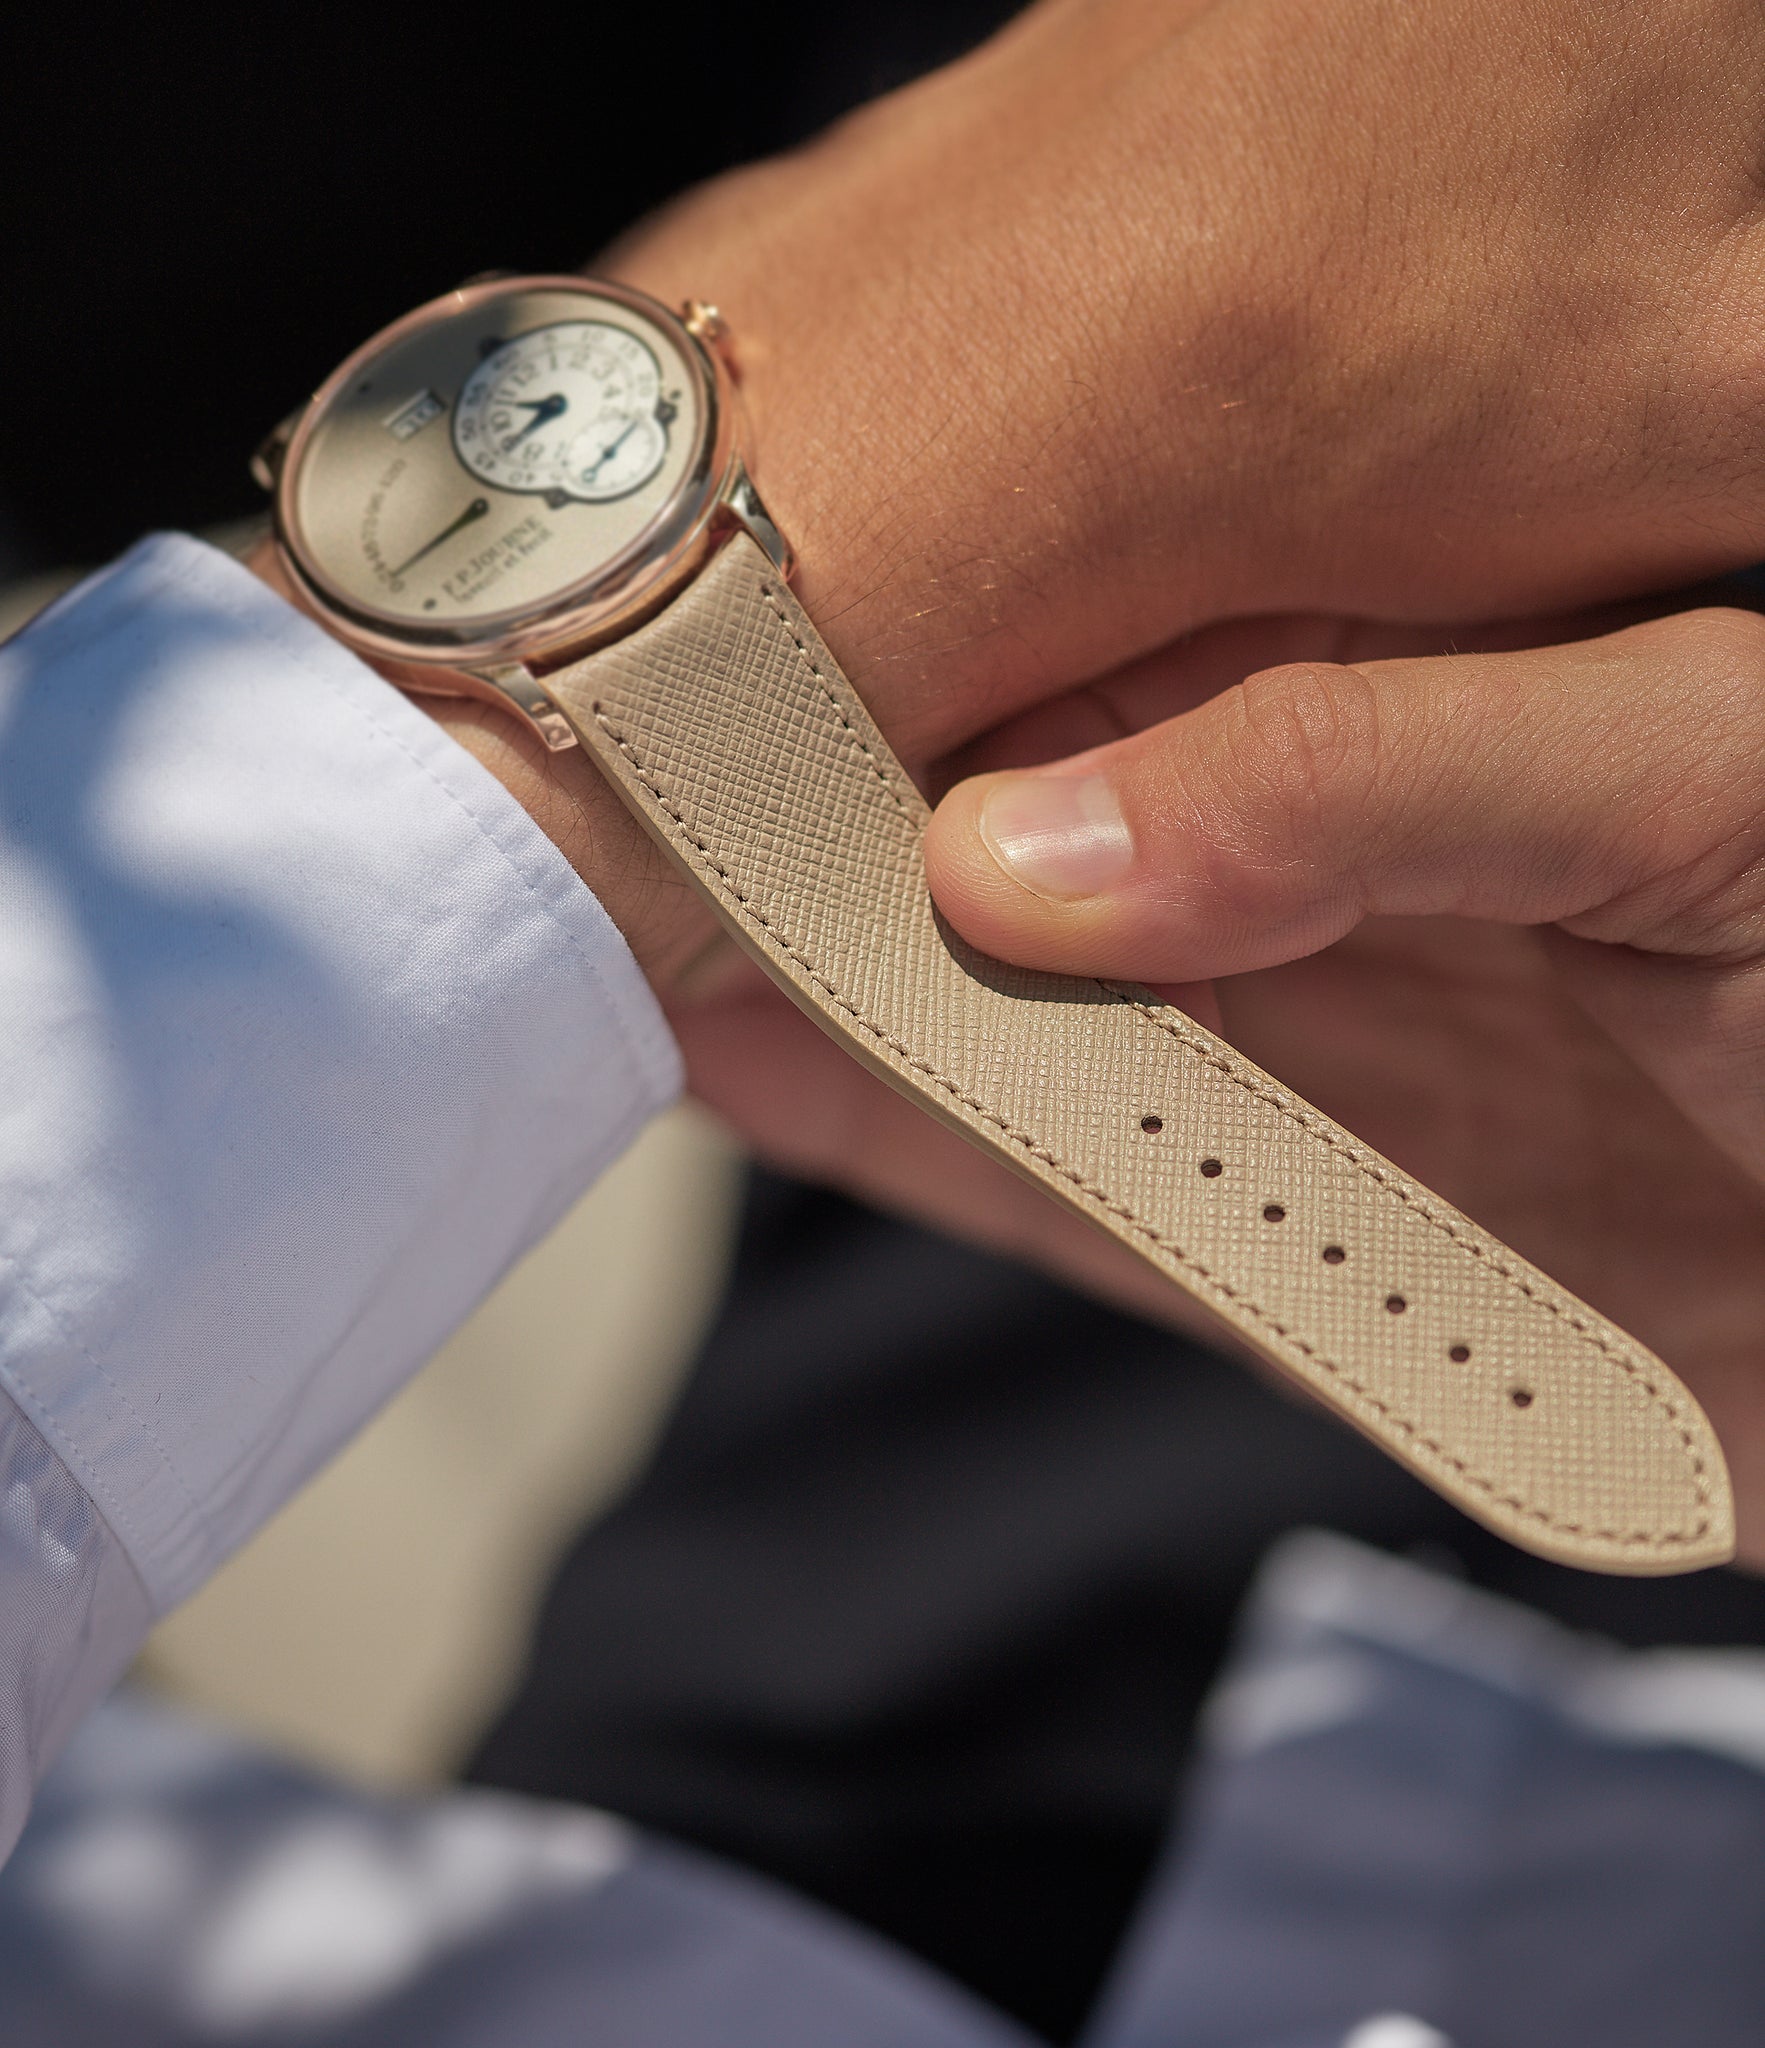 Buy 20mm x 19mm Sardegna Molequin F. P. Journe curved watch strap Saffiano cream calfskin leather quick-release springbars buckle handcrafted European-made for sale online at A Collected Man London